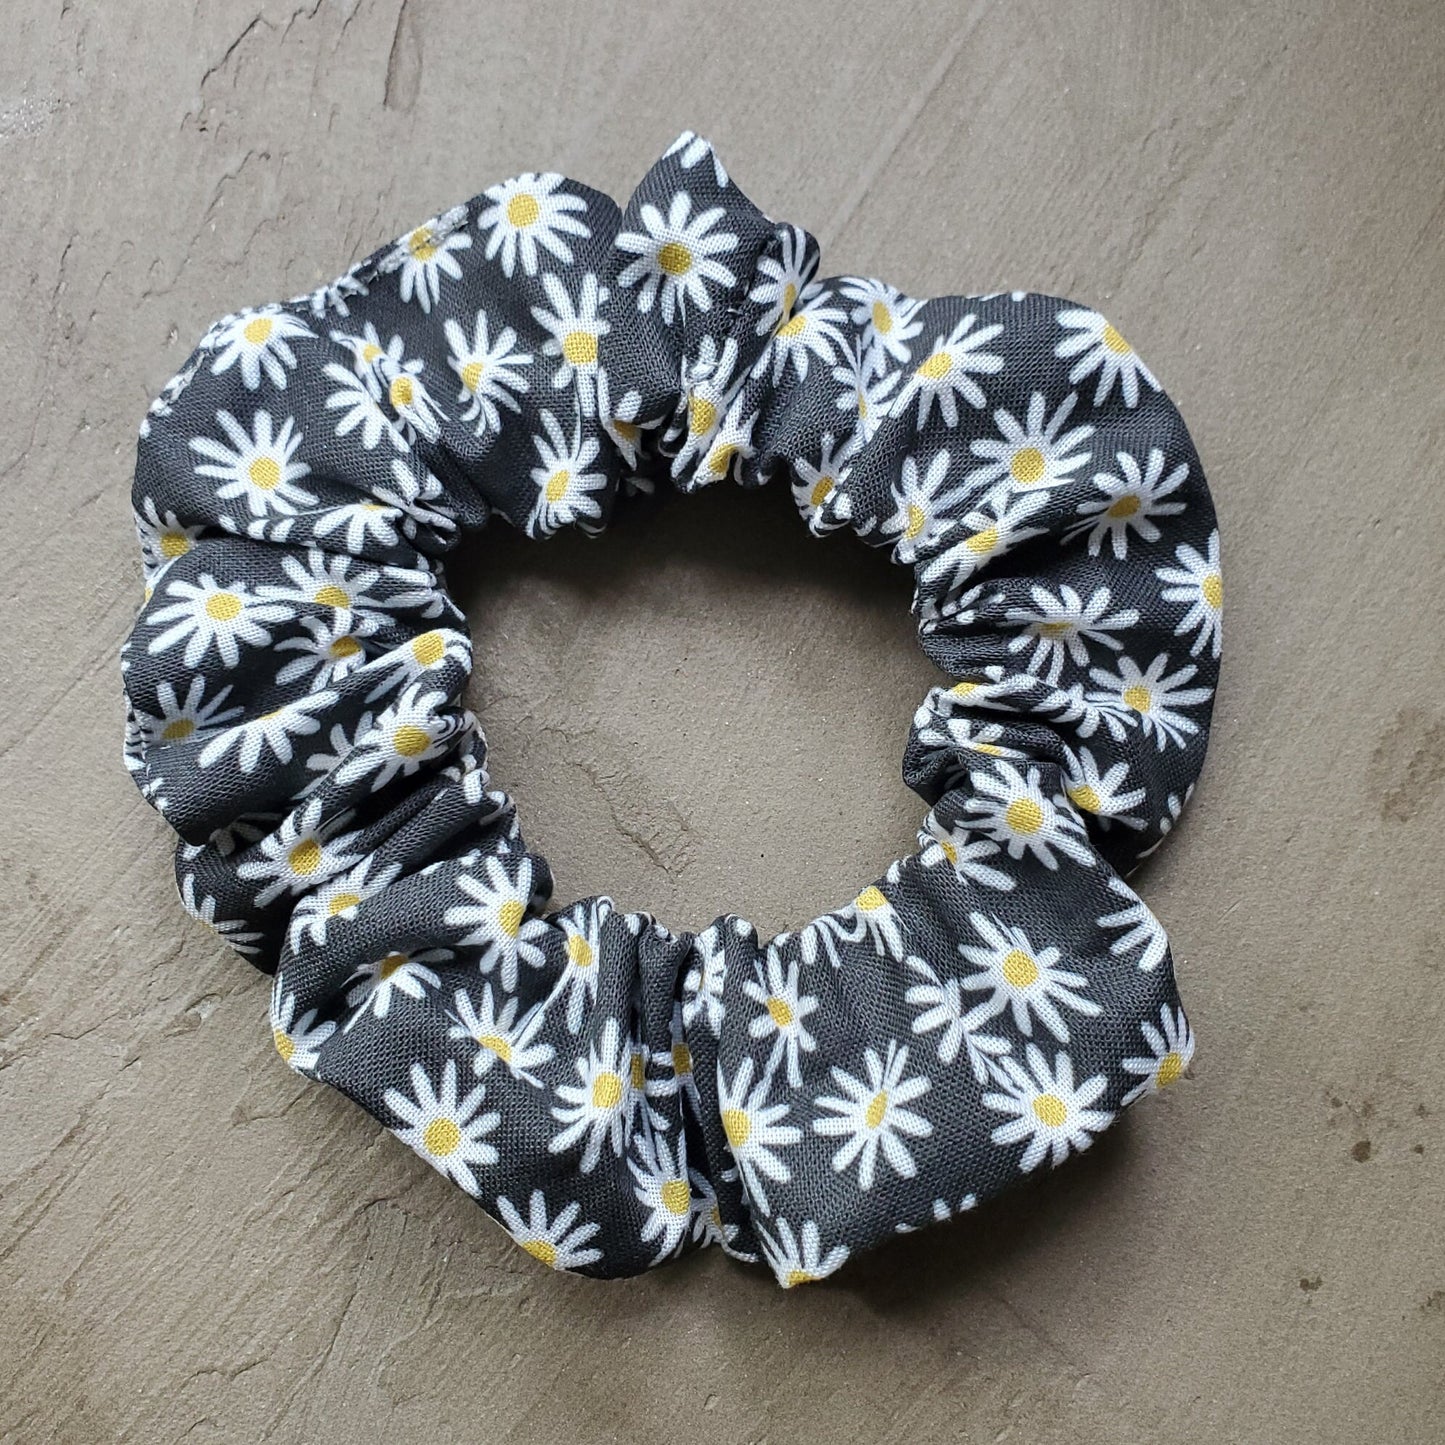 Scrunchie in natural sunlight on a concrete background.